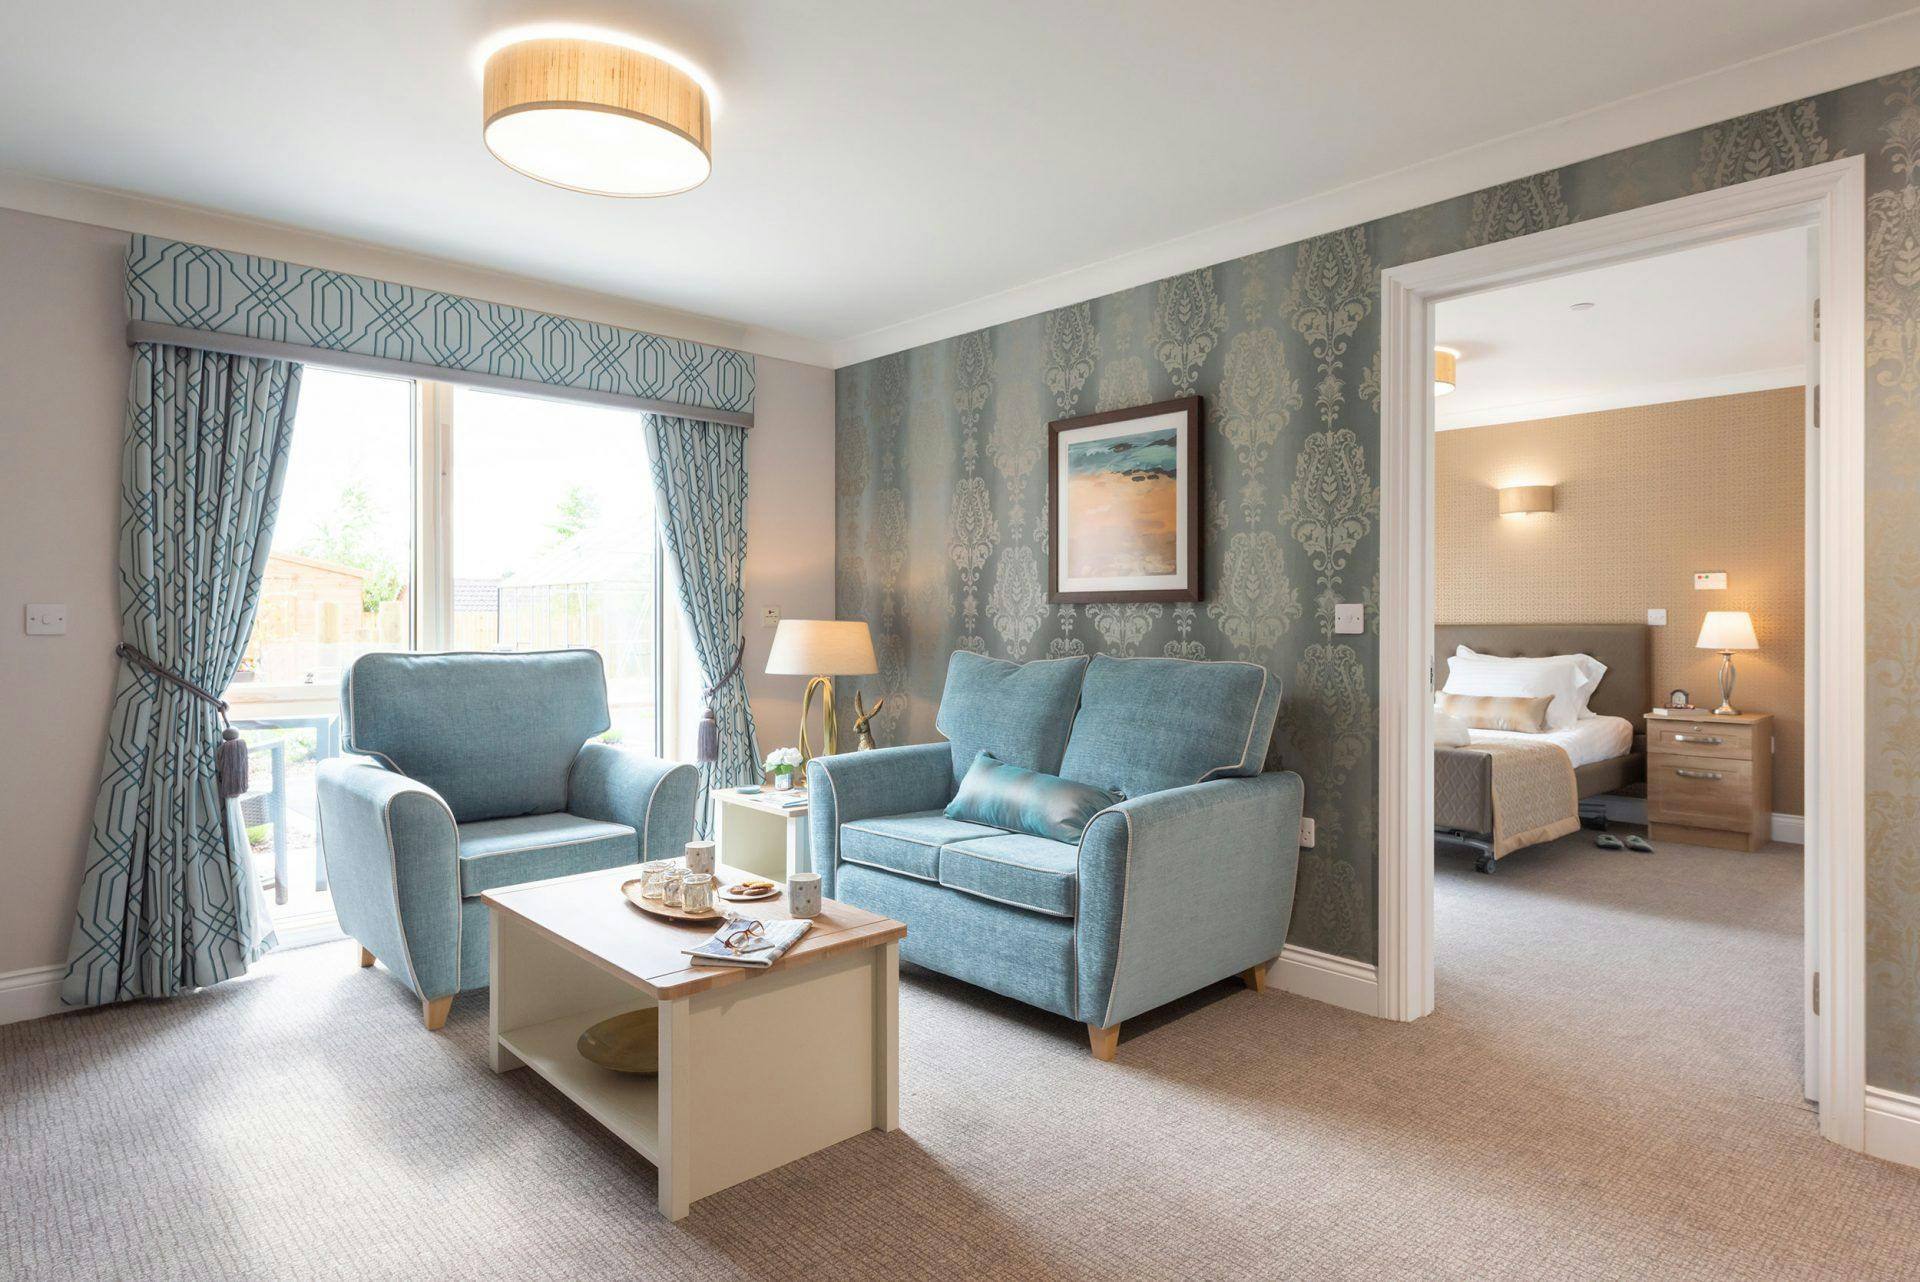 Bedroom suite of Lakeview Grange care home in Chichester, West Sussex